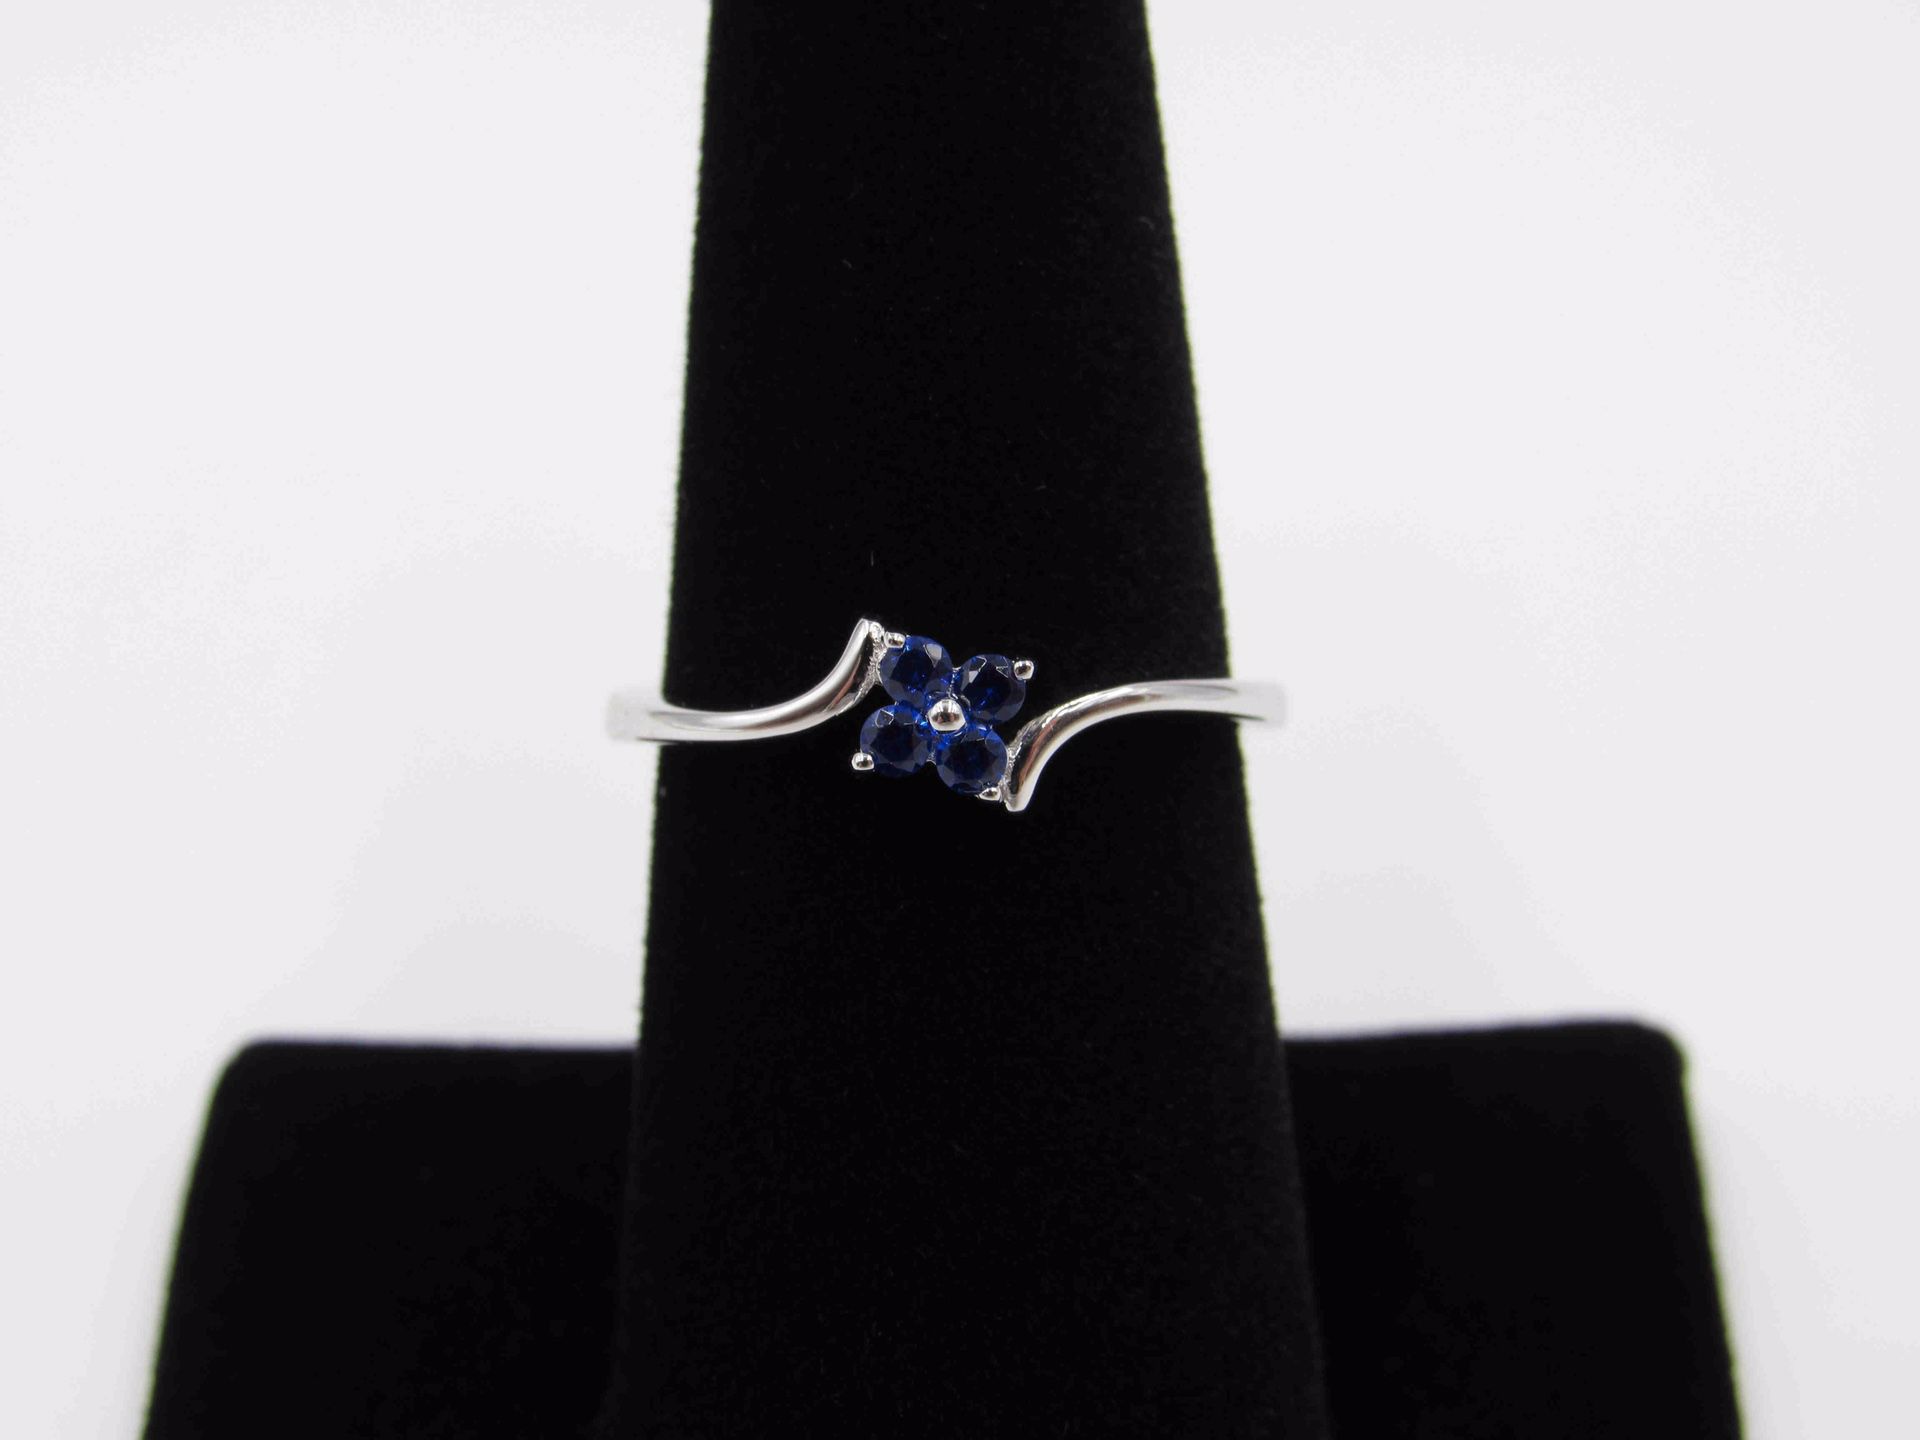 Sterling Silver Ring Size 5, 6, 7 Blue Floral Flower Cubic Zirconia Diamond Band Handmade Everyday Statement Minimalist Cute Gift Idea Cool